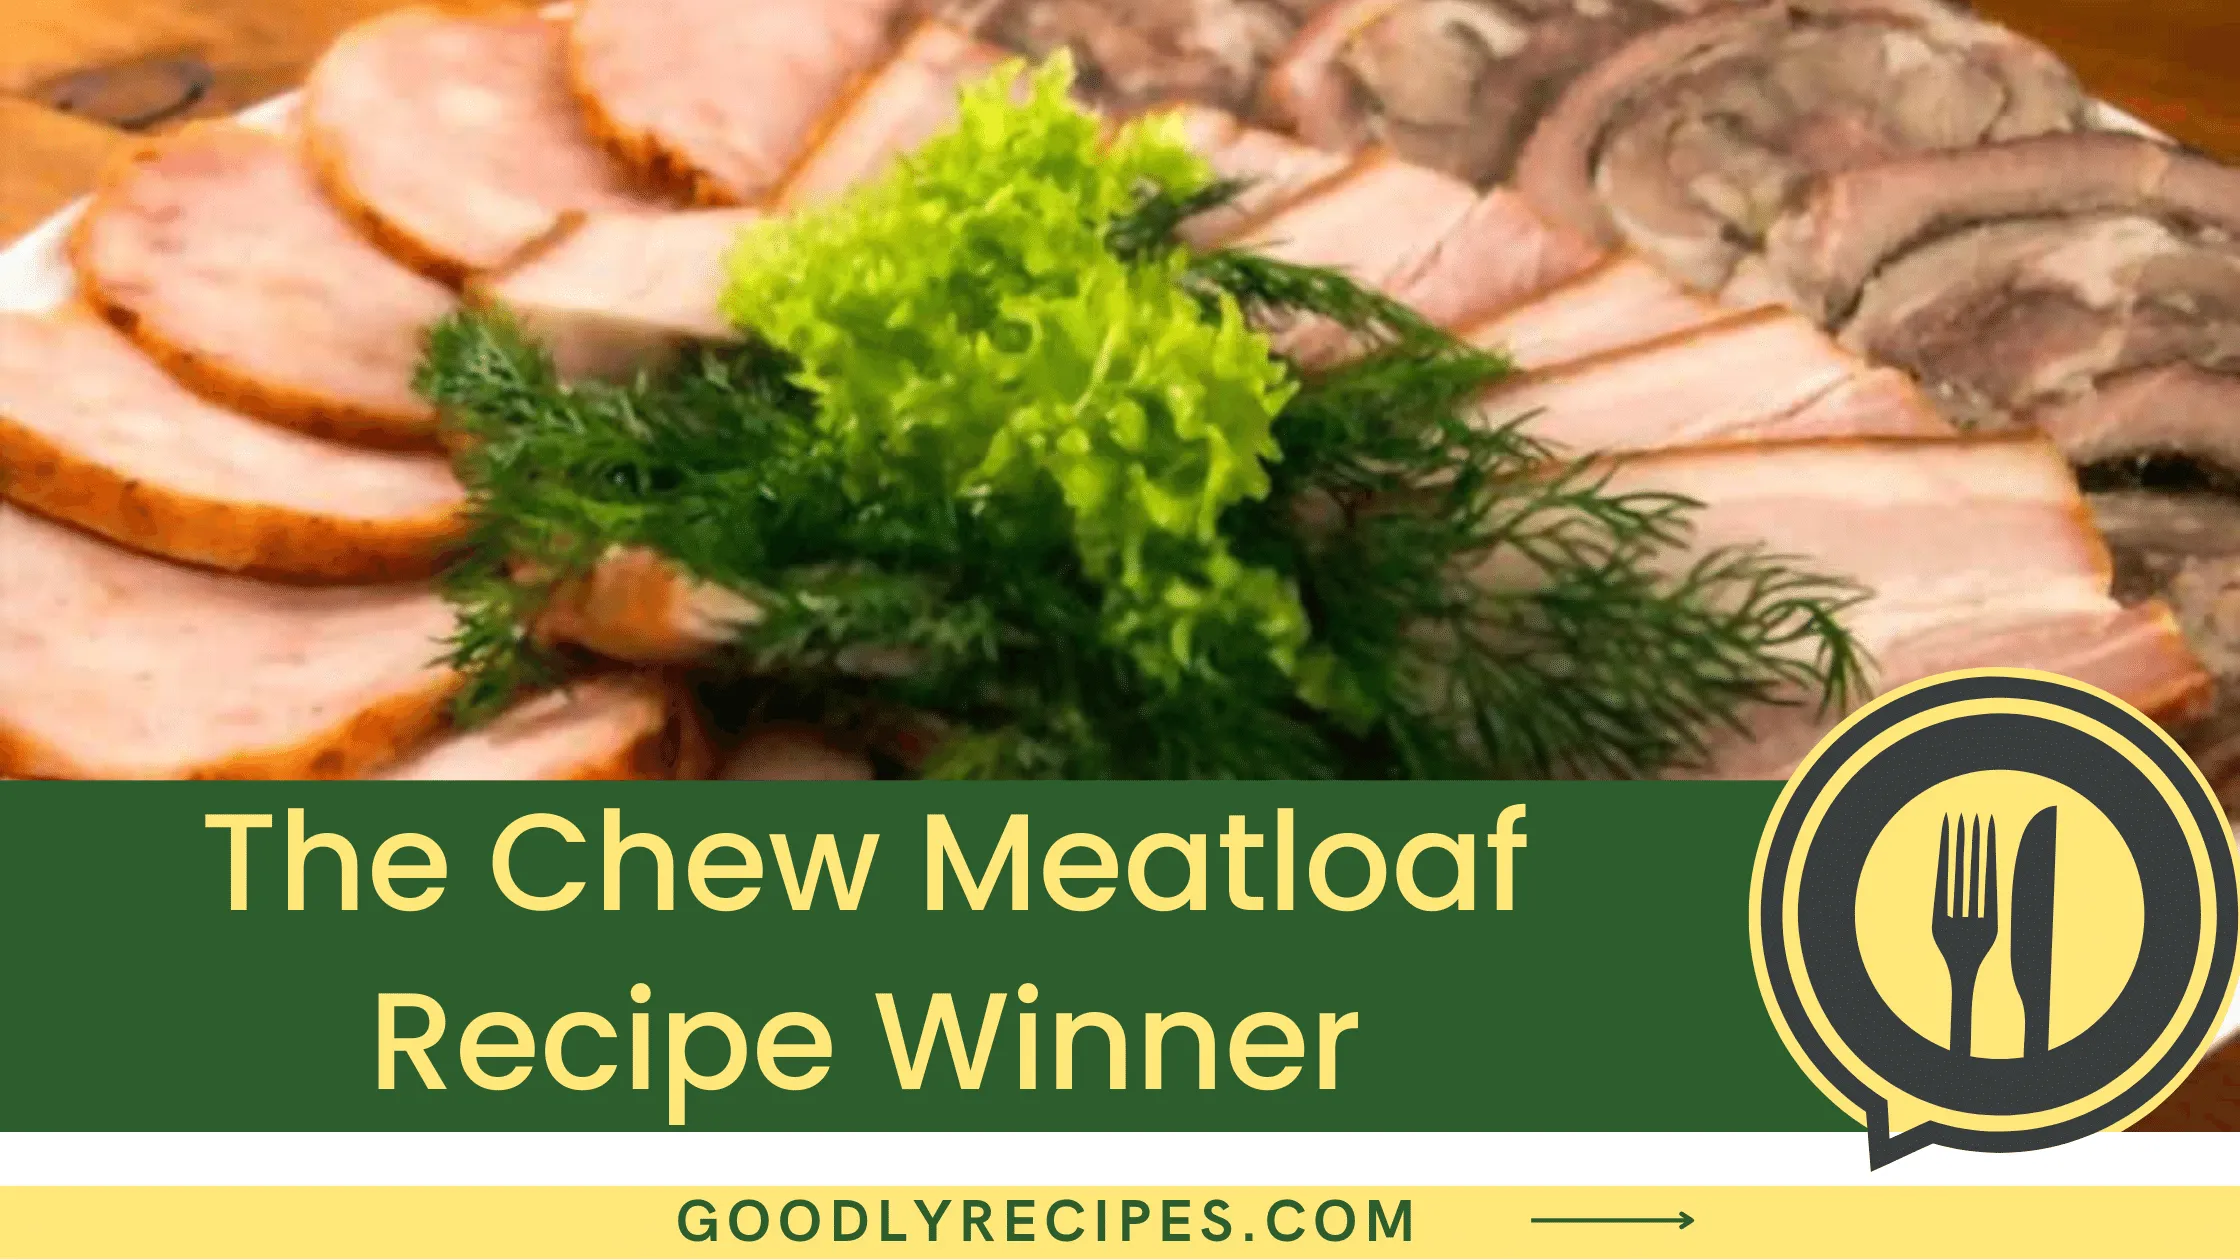 What is The Chew Meatloaf Recipe Winner?